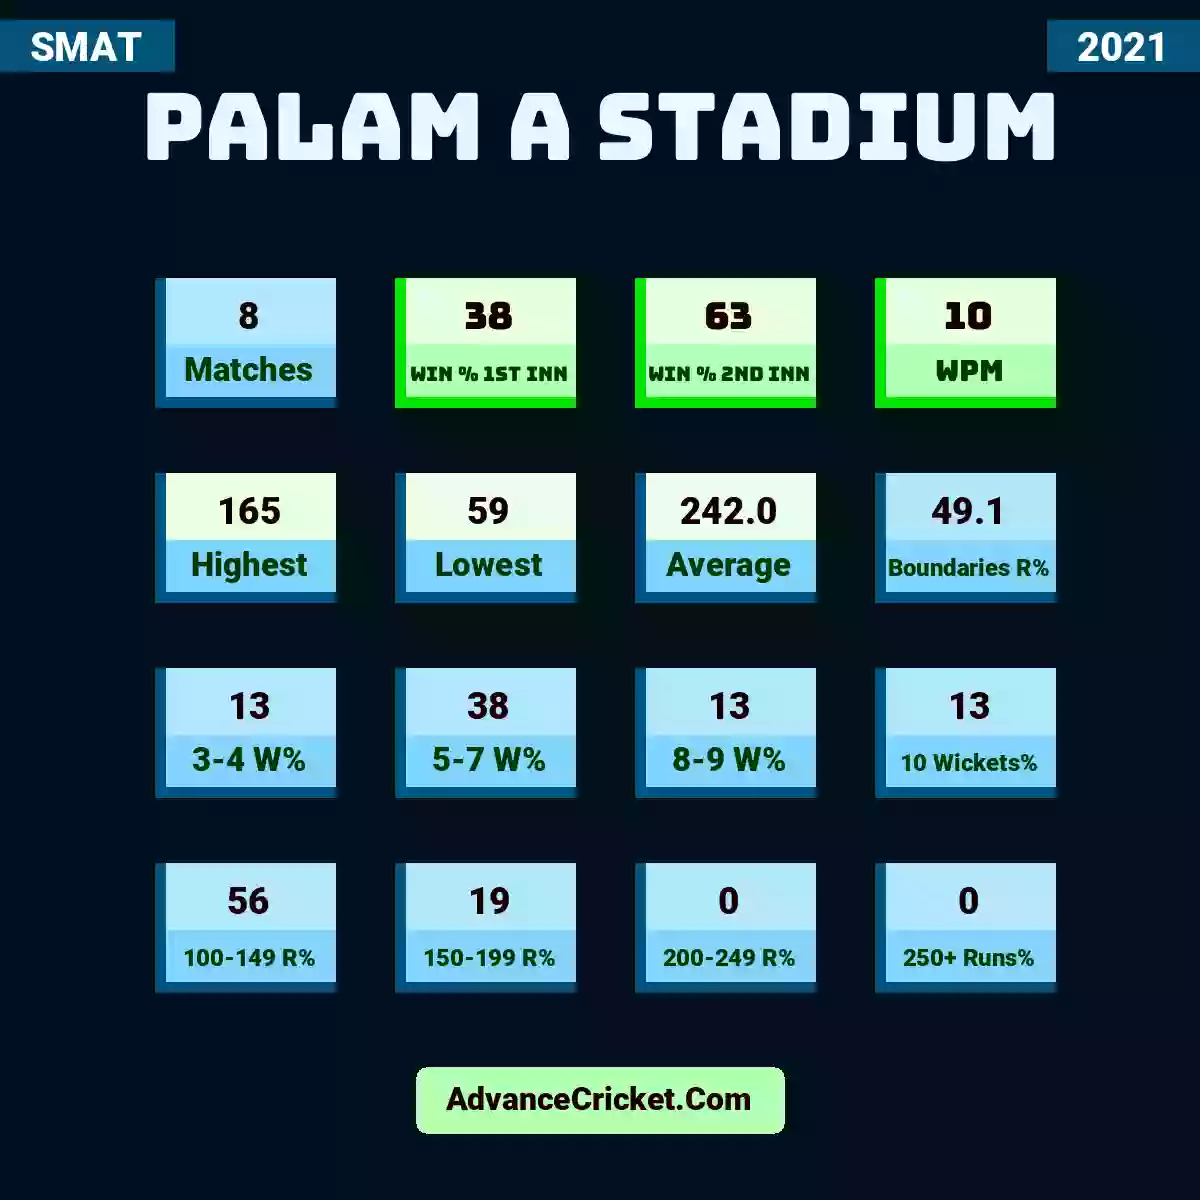 Image showing Palam A Stadium with Matches: 8, Win % 1st Inn: 38, Win % 2nd Inn: 63, WPM: 10, Highest: 165, Lowest: 59, Average: 242.0, Boundaries R%: 49.1, 3-4 W%: 13, 5-7 W%: 38, 8-9 W%: 13, 10 Wickets%: 13, 100-149 R%: 56, 150-199 R%: 19, 200-249 R%: 0, 250+ Runs%: 0.